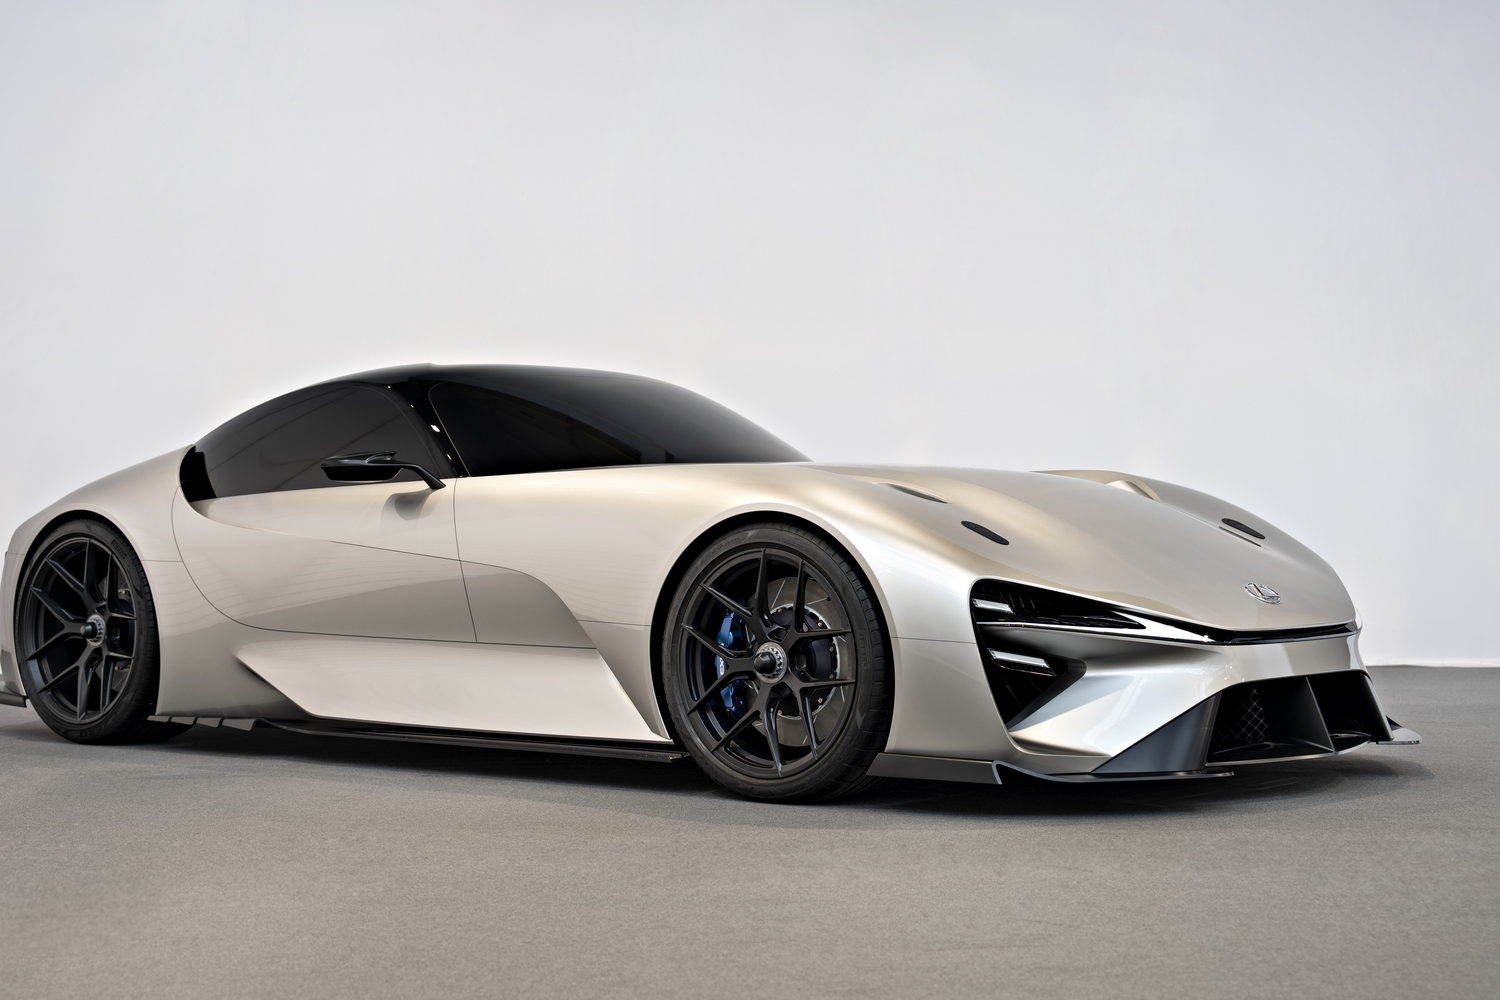 Lexus will launch electric supercar